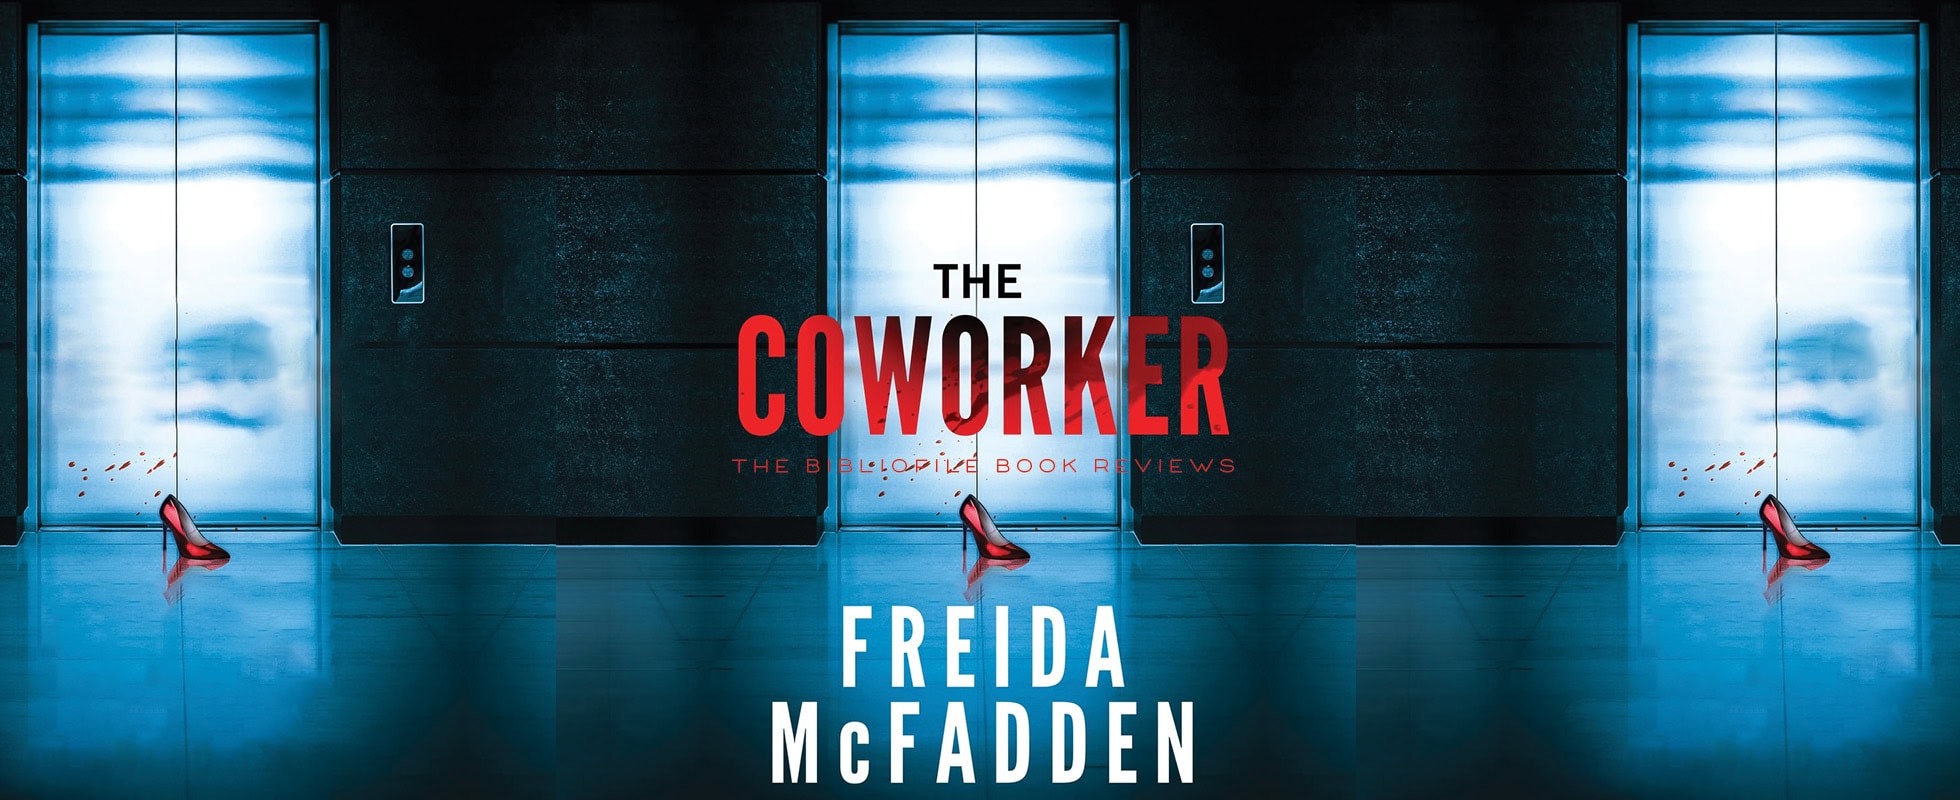 the coworker by freida mcfadden book review plot summary synopsis recap discussion spoilers endling explanations